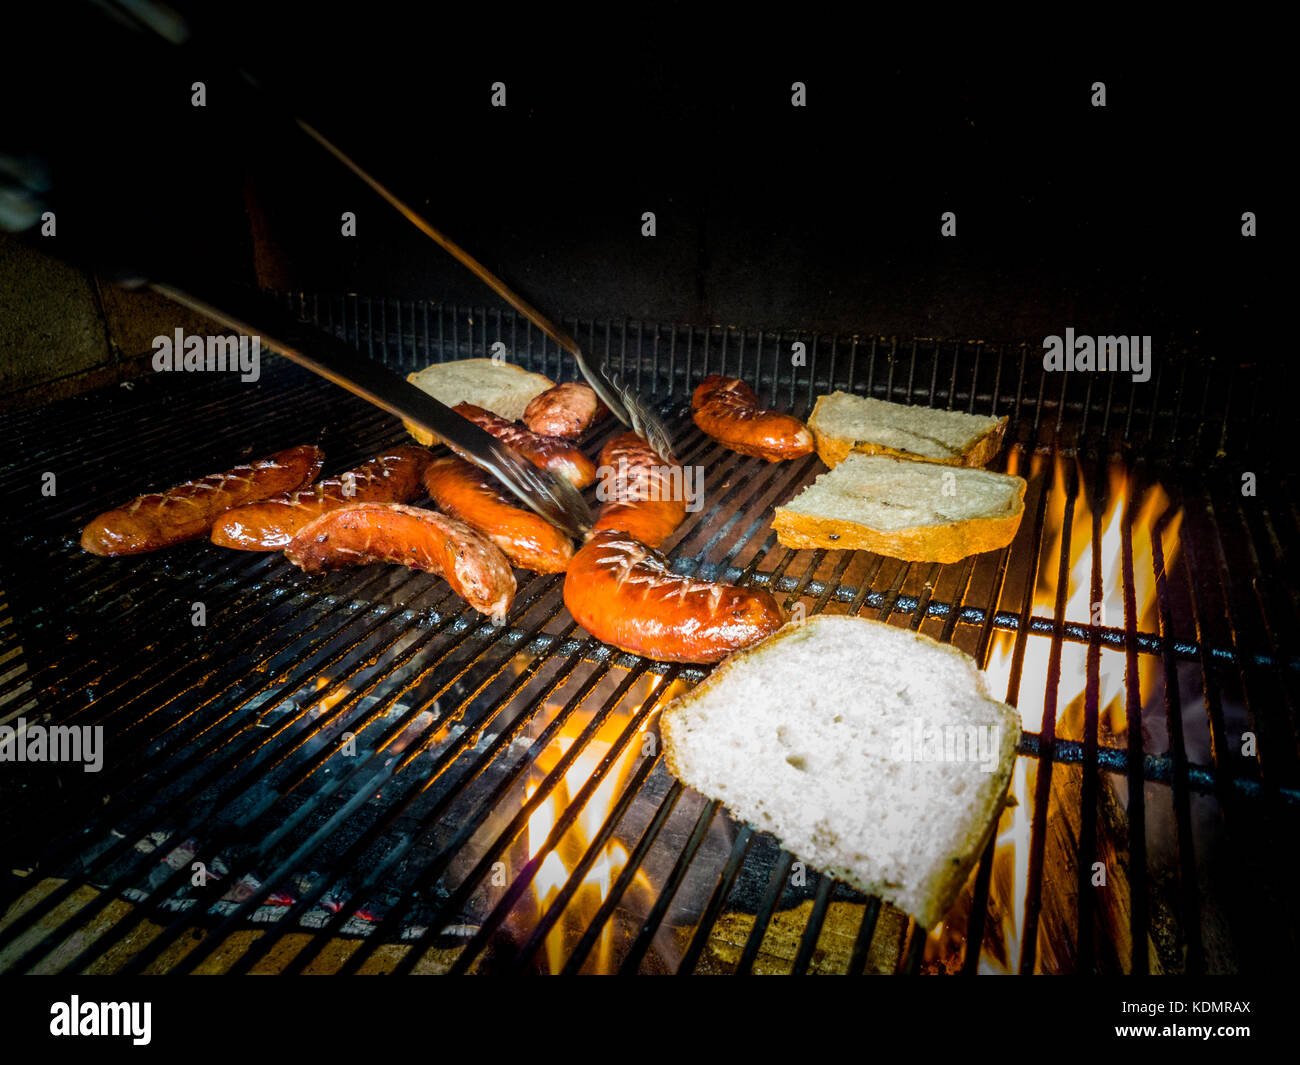 Fried sausage and bread on grill with fire Stock Photo